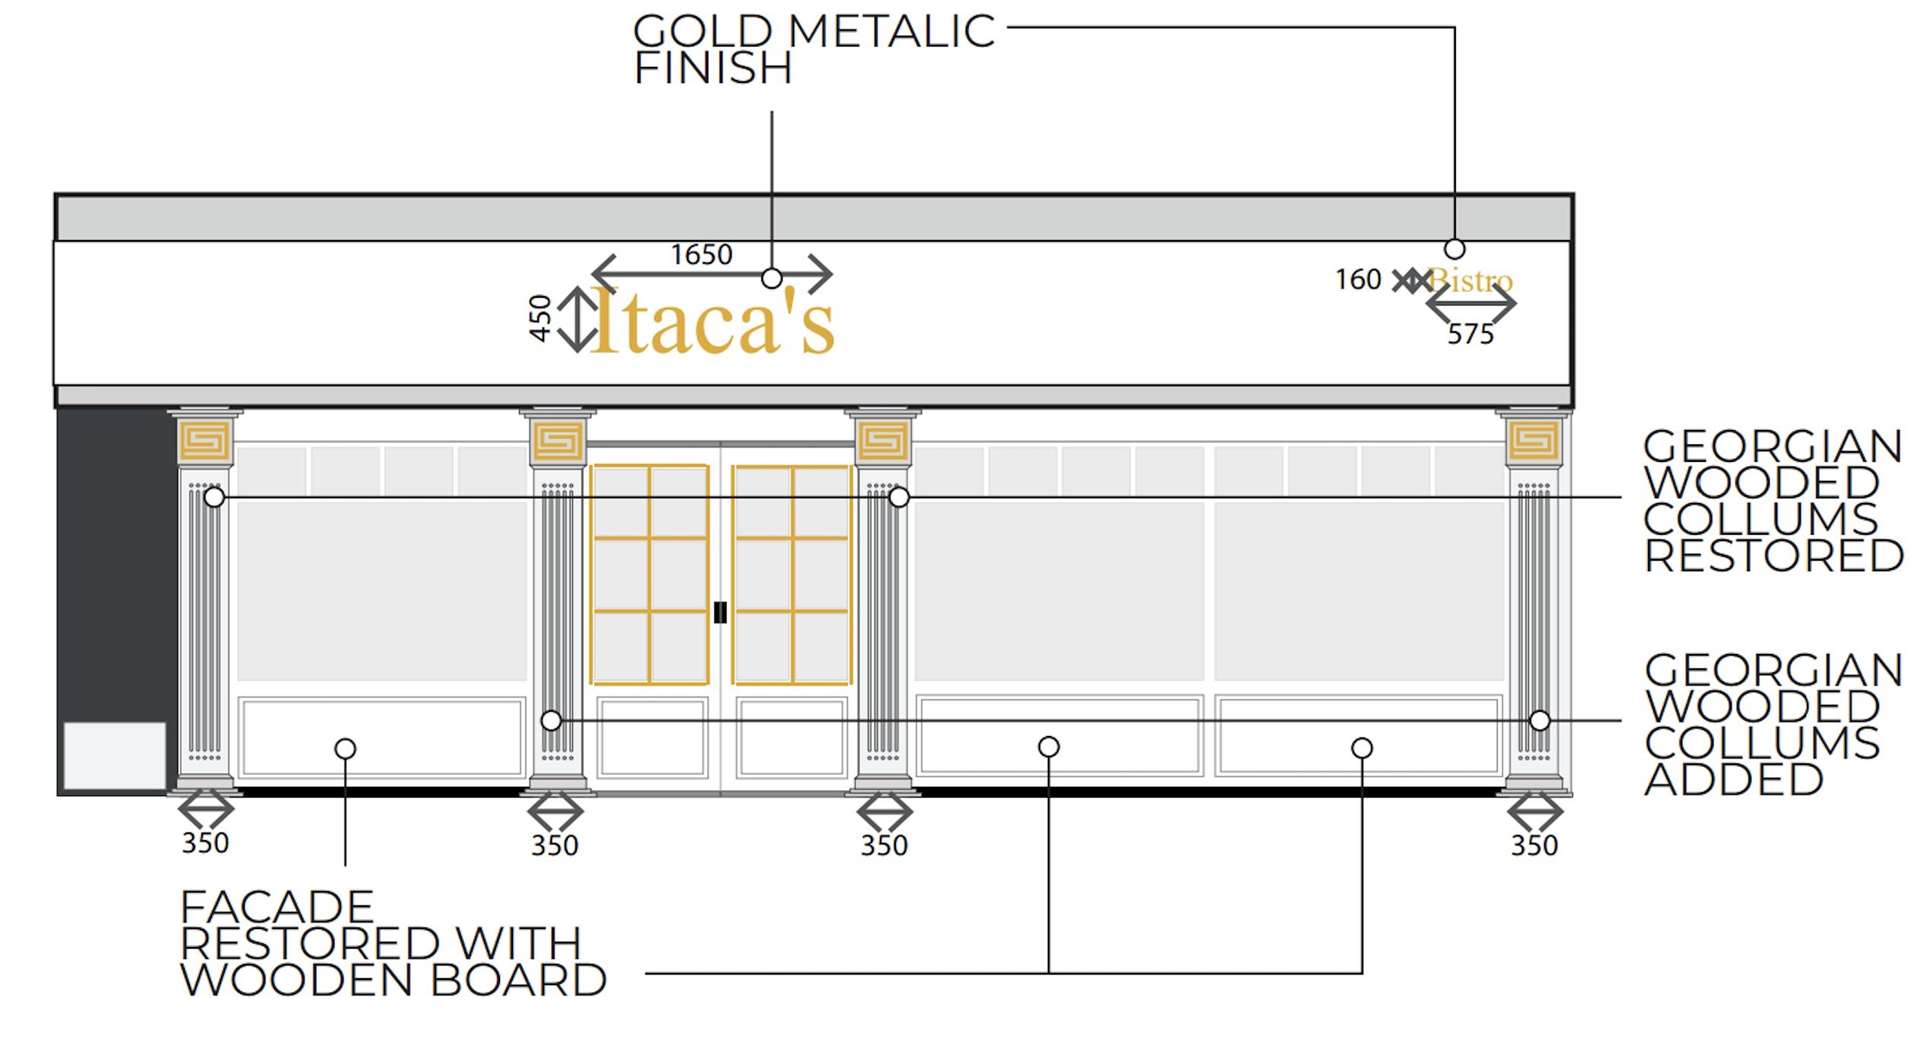 How the shopfront could look